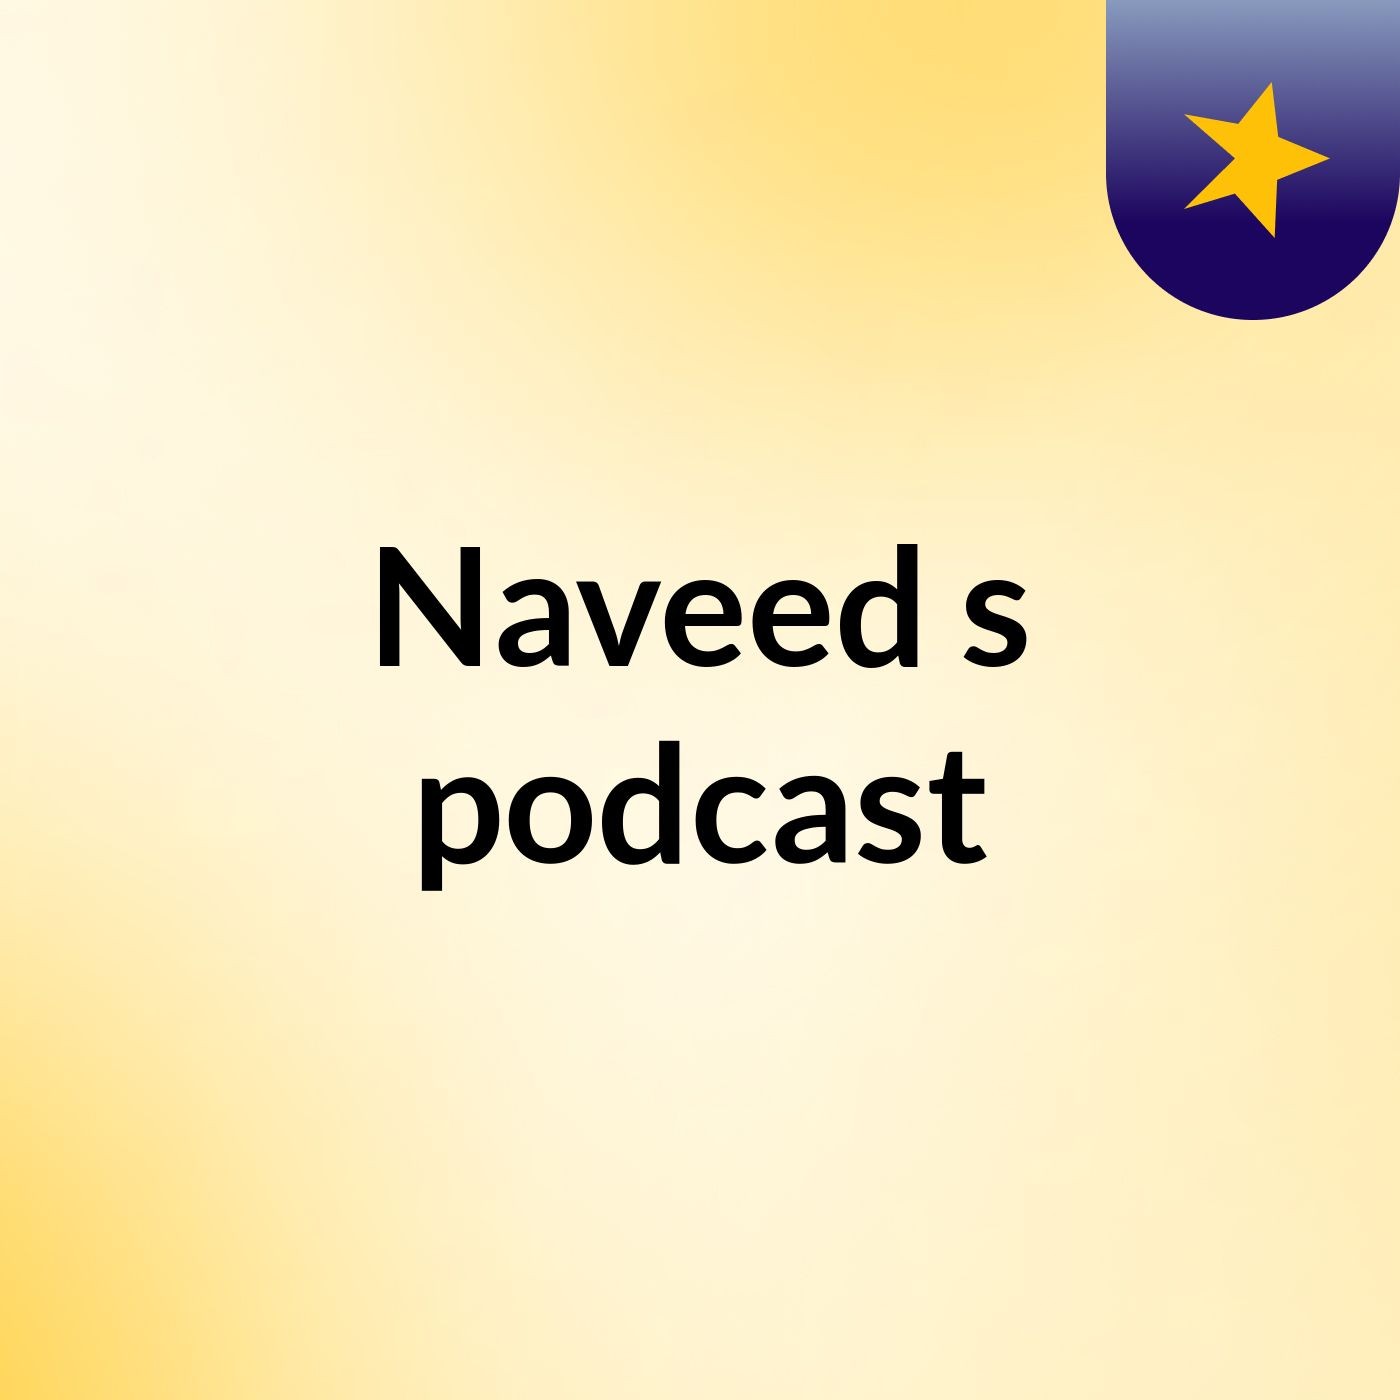 Naveed's podcast